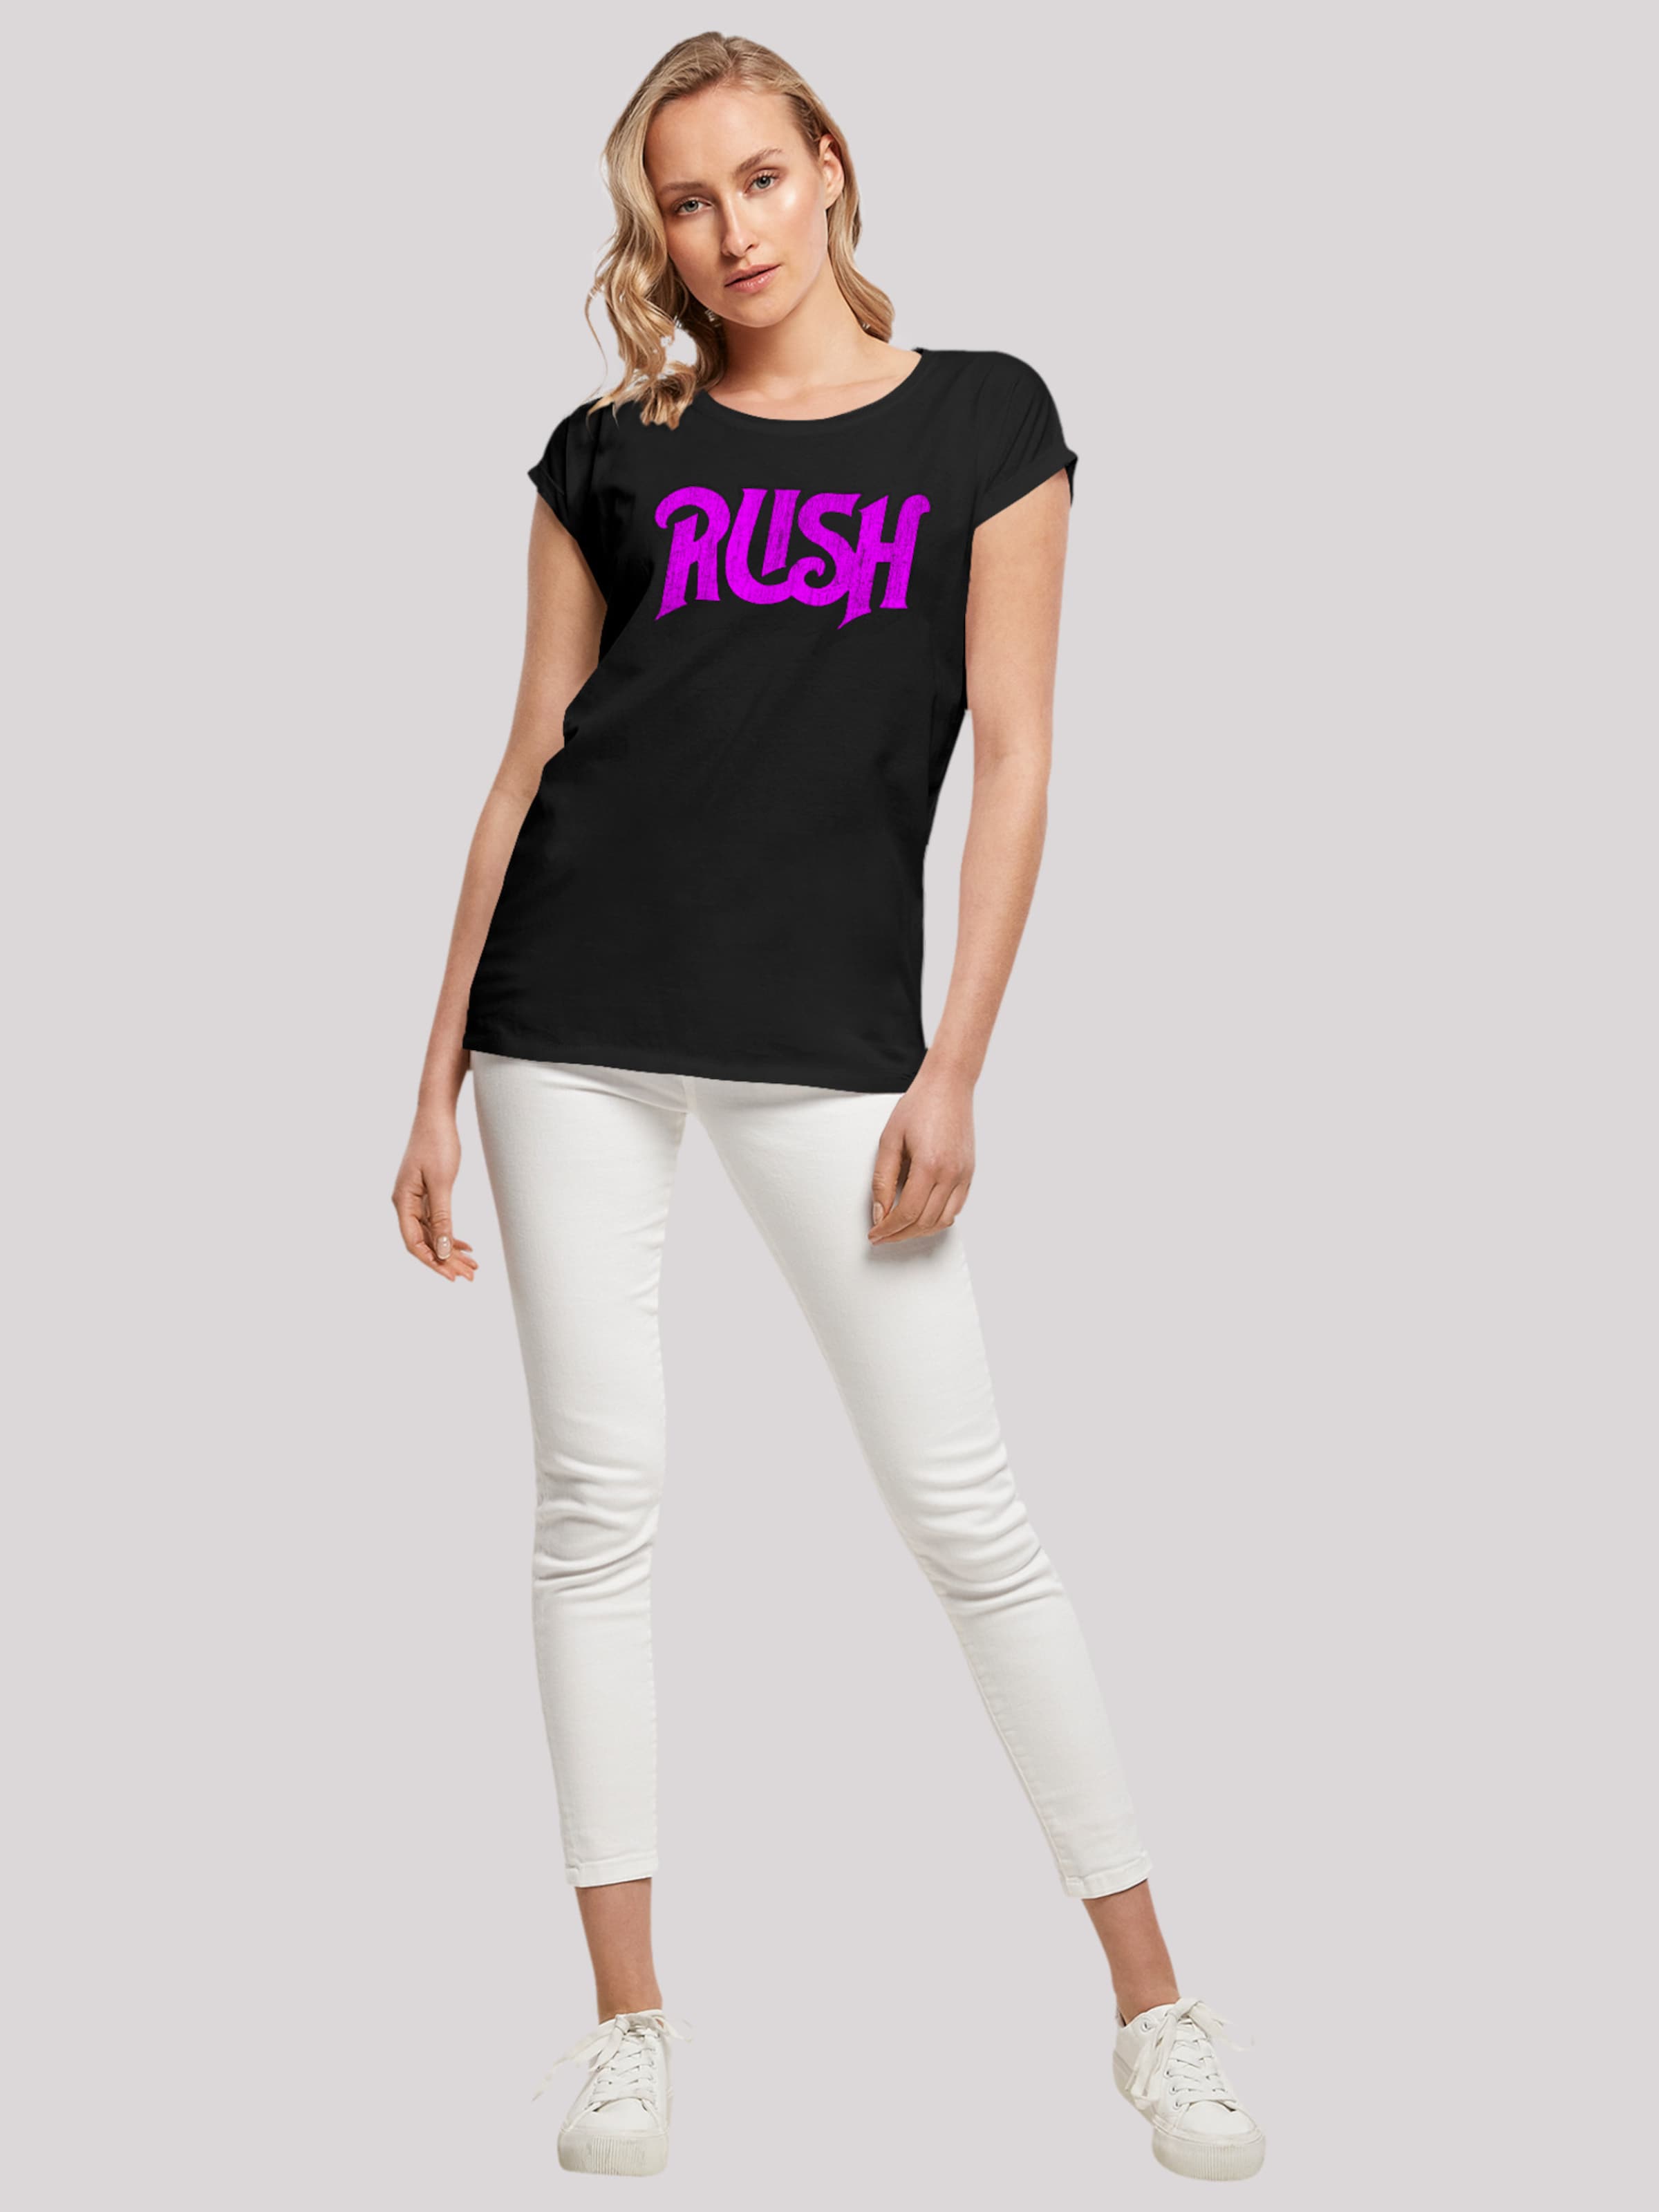 F4NT4STIC Shirt ABOUT Distressed Rock in \'Rush Black Logo\' YOU | Band